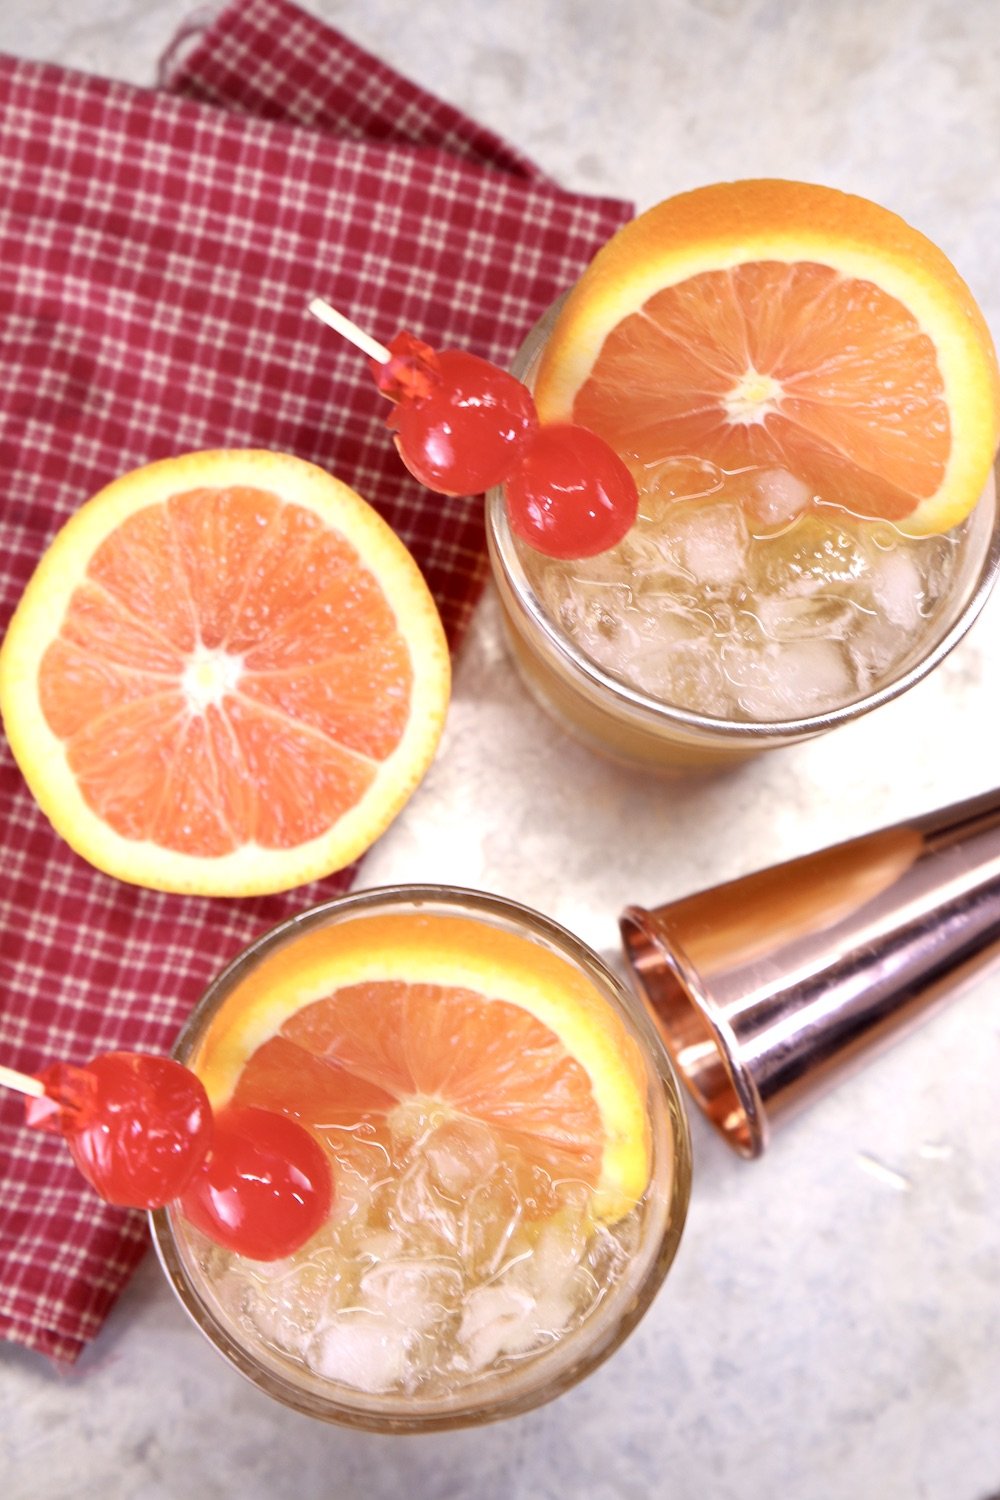 Amaretto Sour Cocktails - garnished with orange slices and cherries, cocktail jigger and half an orange on the tray